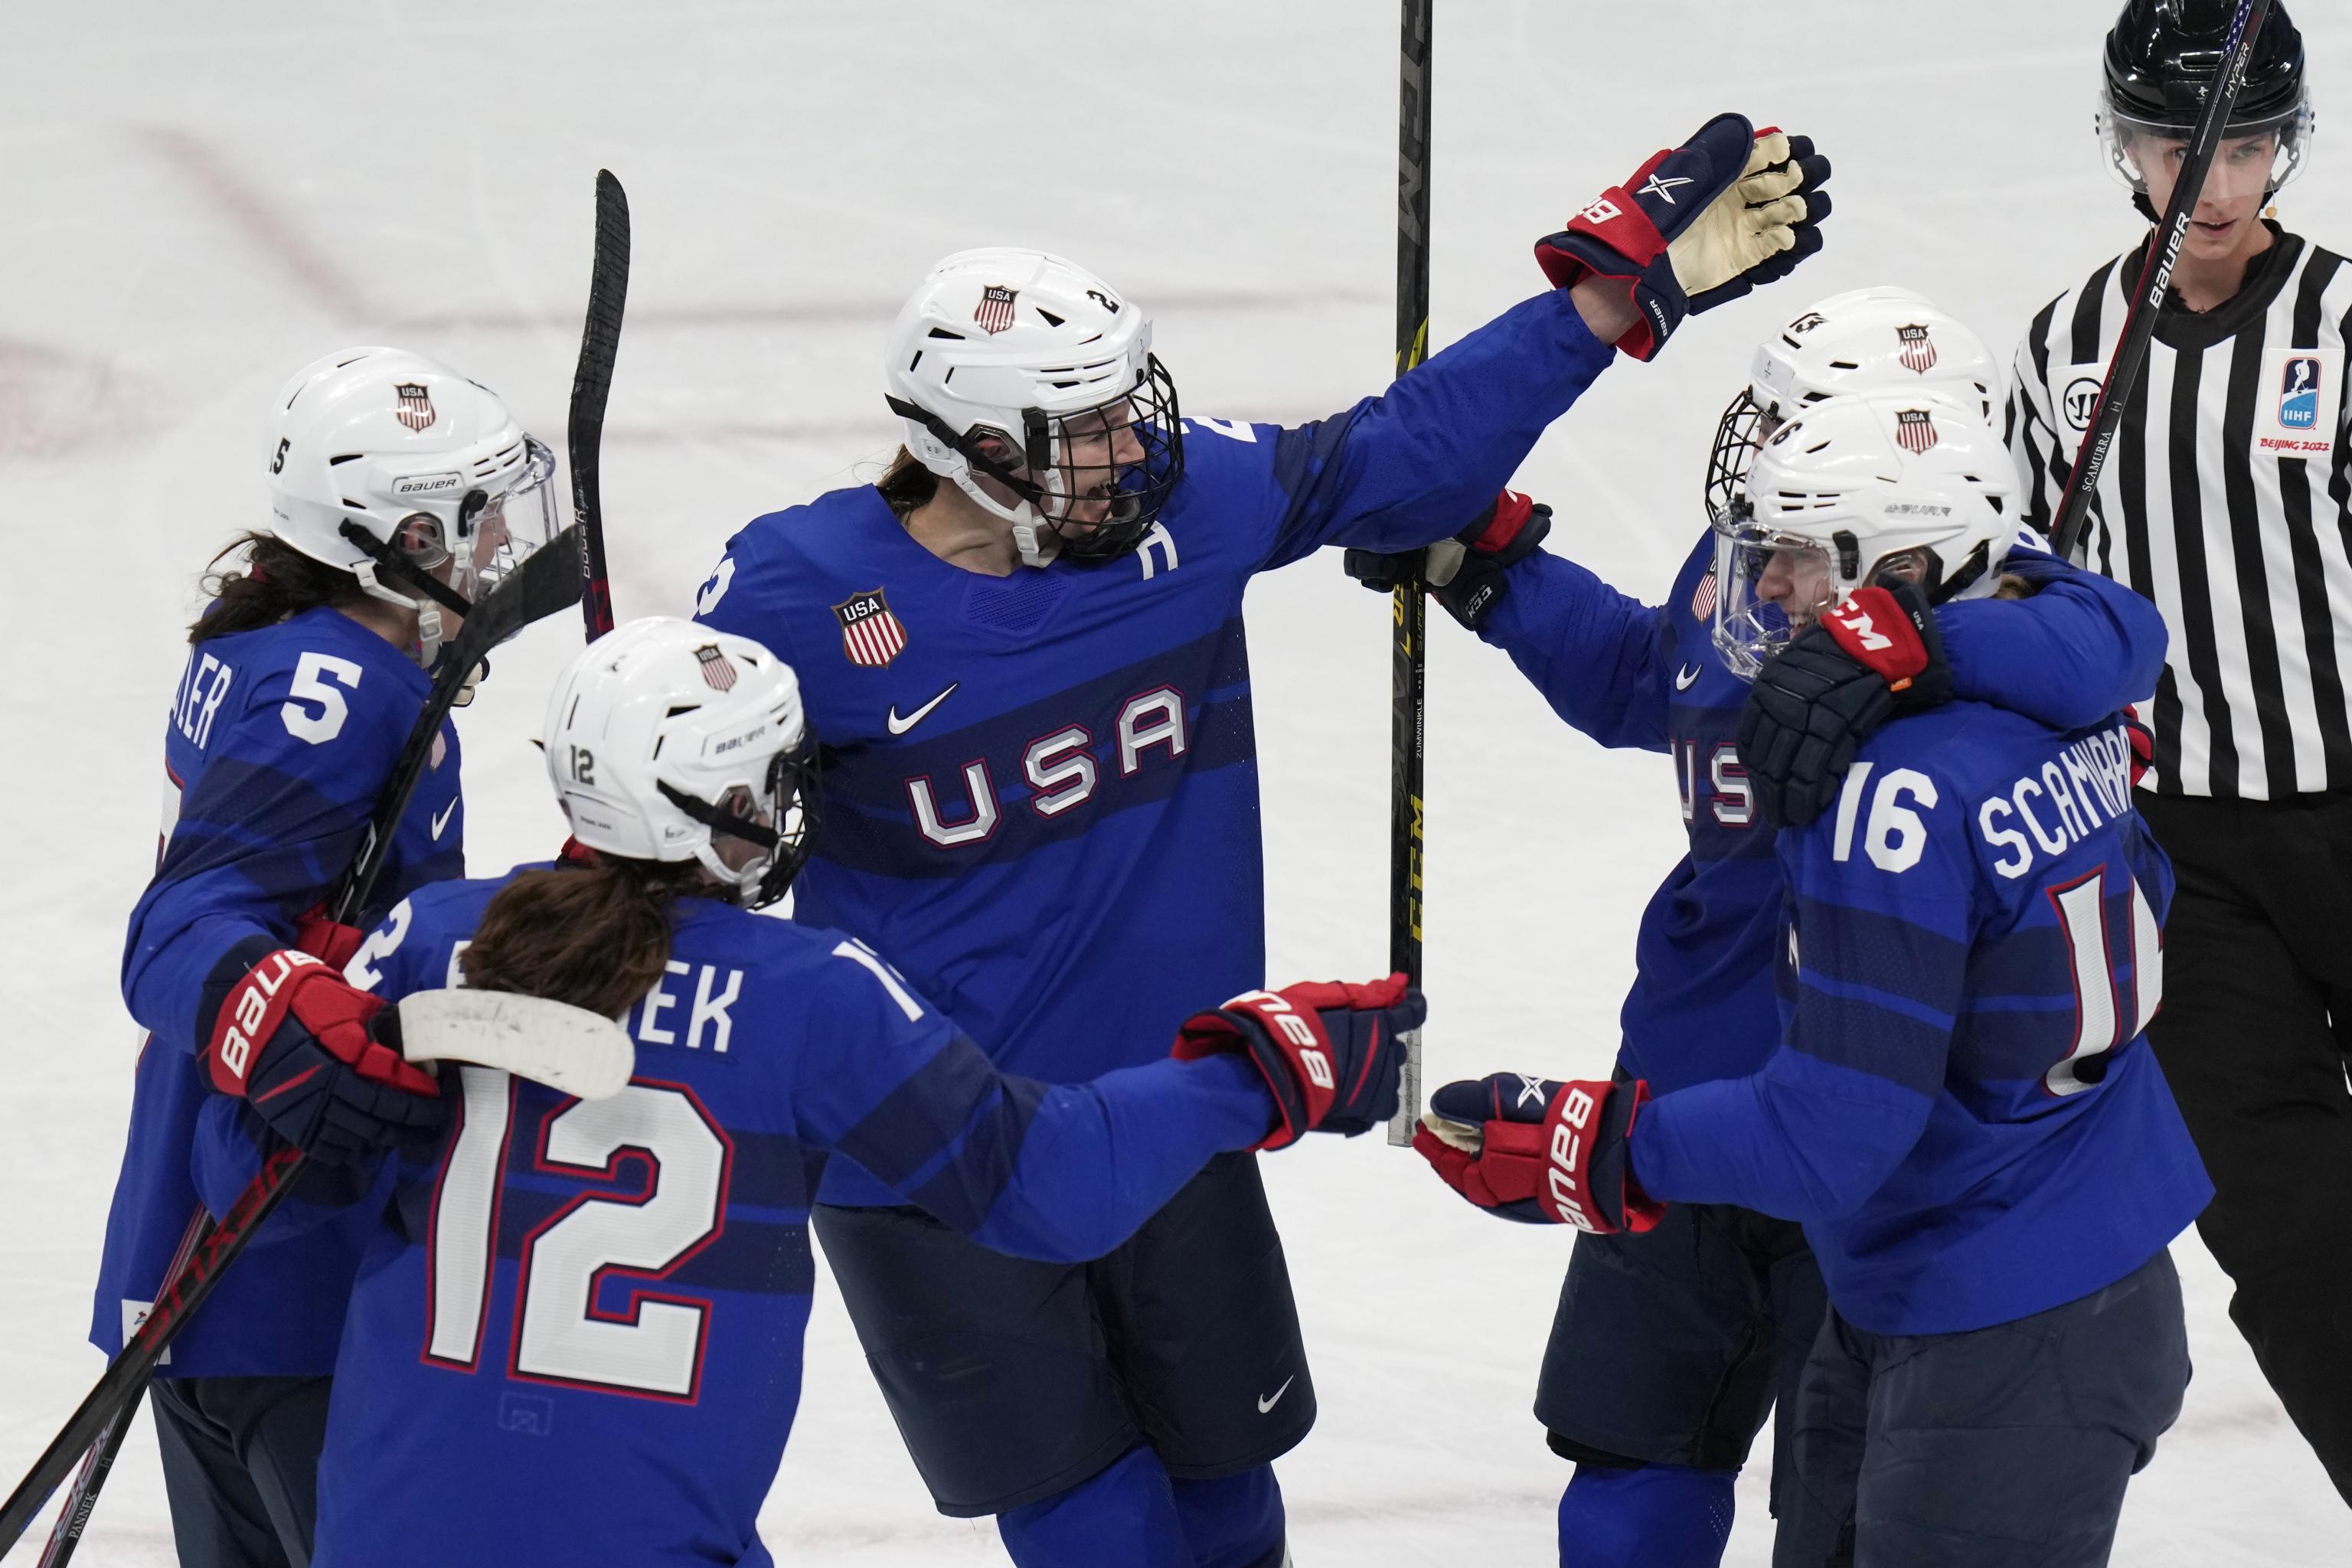 Usa Vs Finland Women S Hockey Live Stream Schedule Preview Bleacher Report Latest News Videos And Highlights